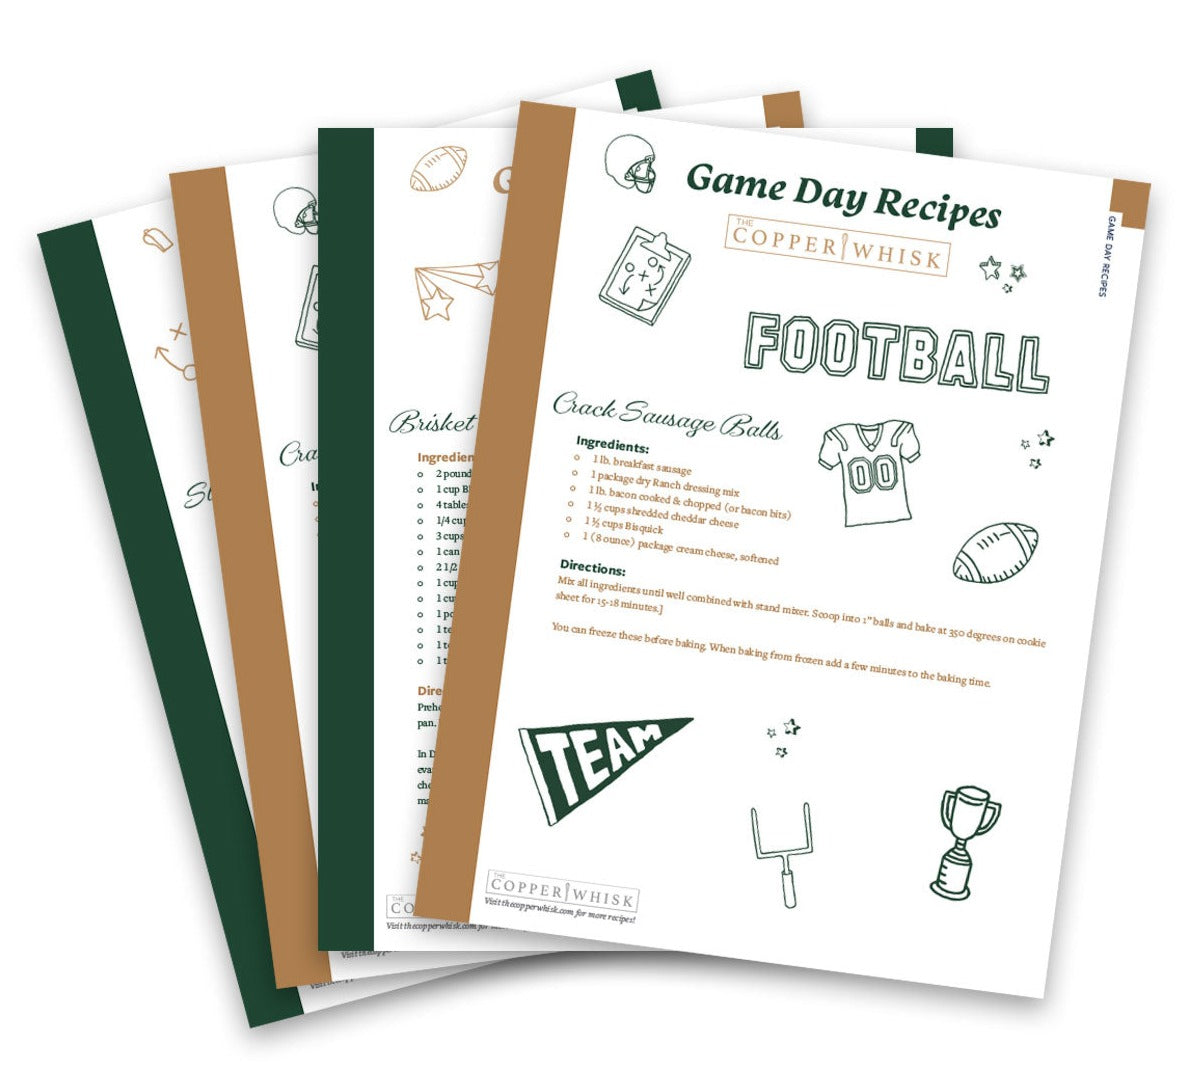 Game Day Recipes: Sports themed ideas from The Copper Whisk (Physical Recipe Cards)